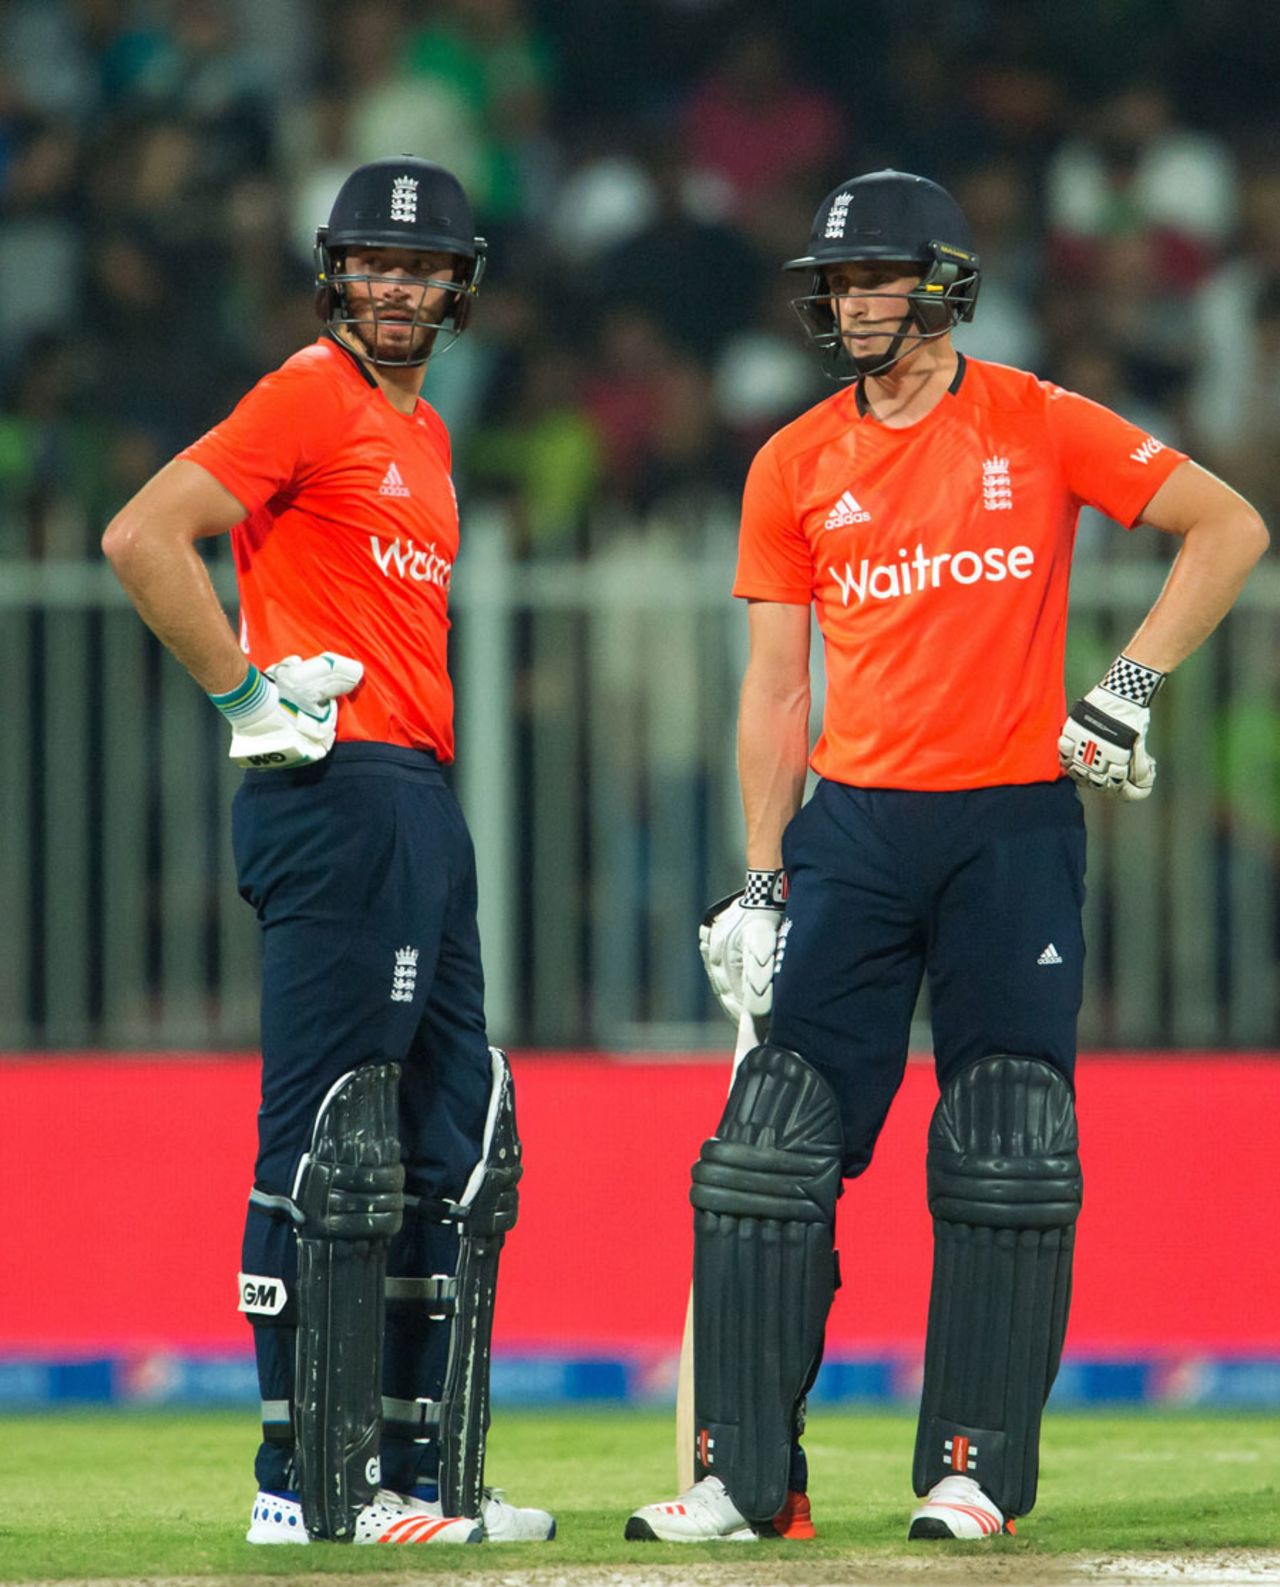 James Vince and Chris Woakes put on 60 for the seventh wicket, Pakistan v England, 3rd T20, Sharjah, November 30, 2015